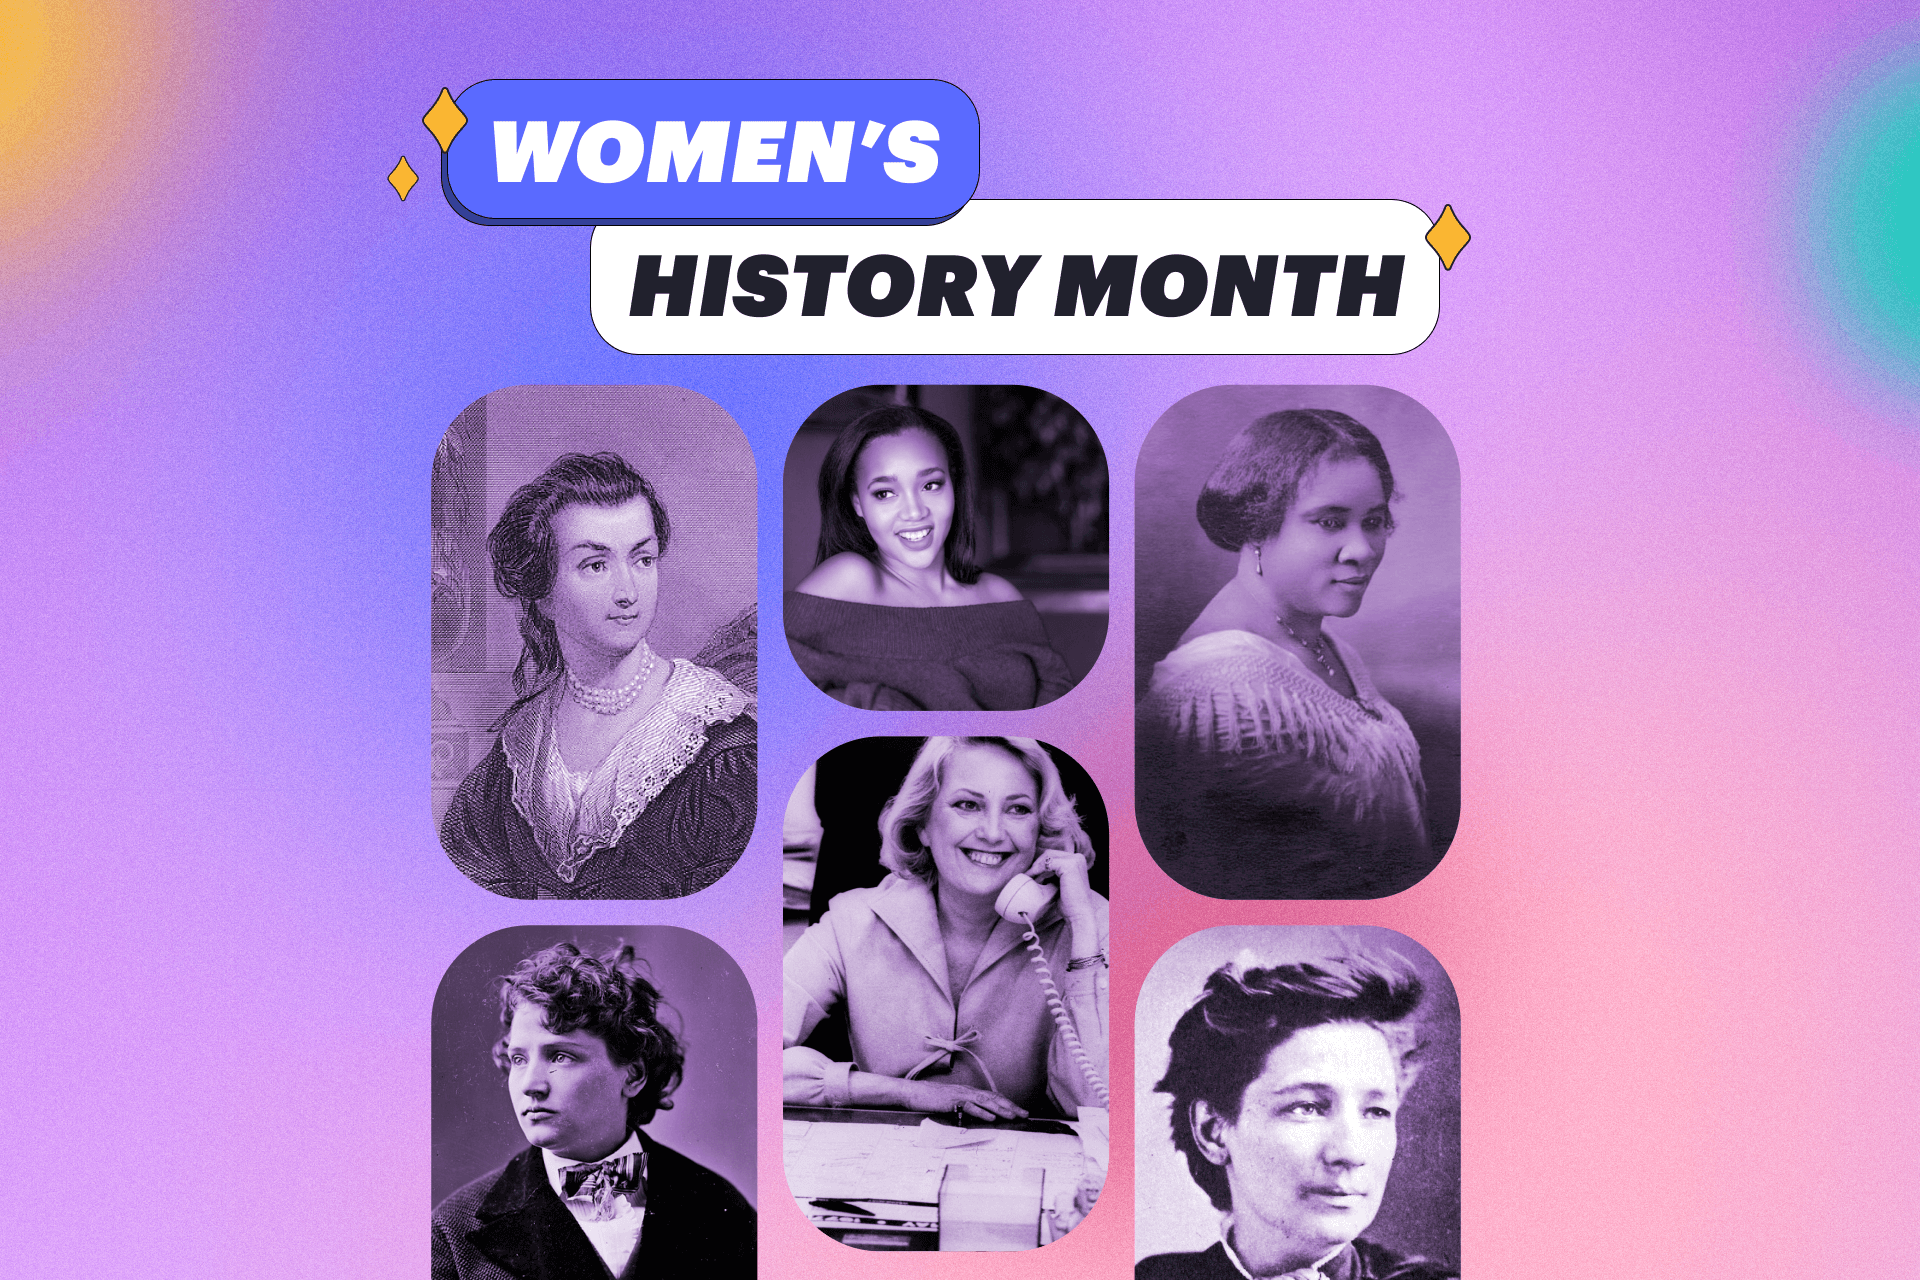 women's history month with collage of women